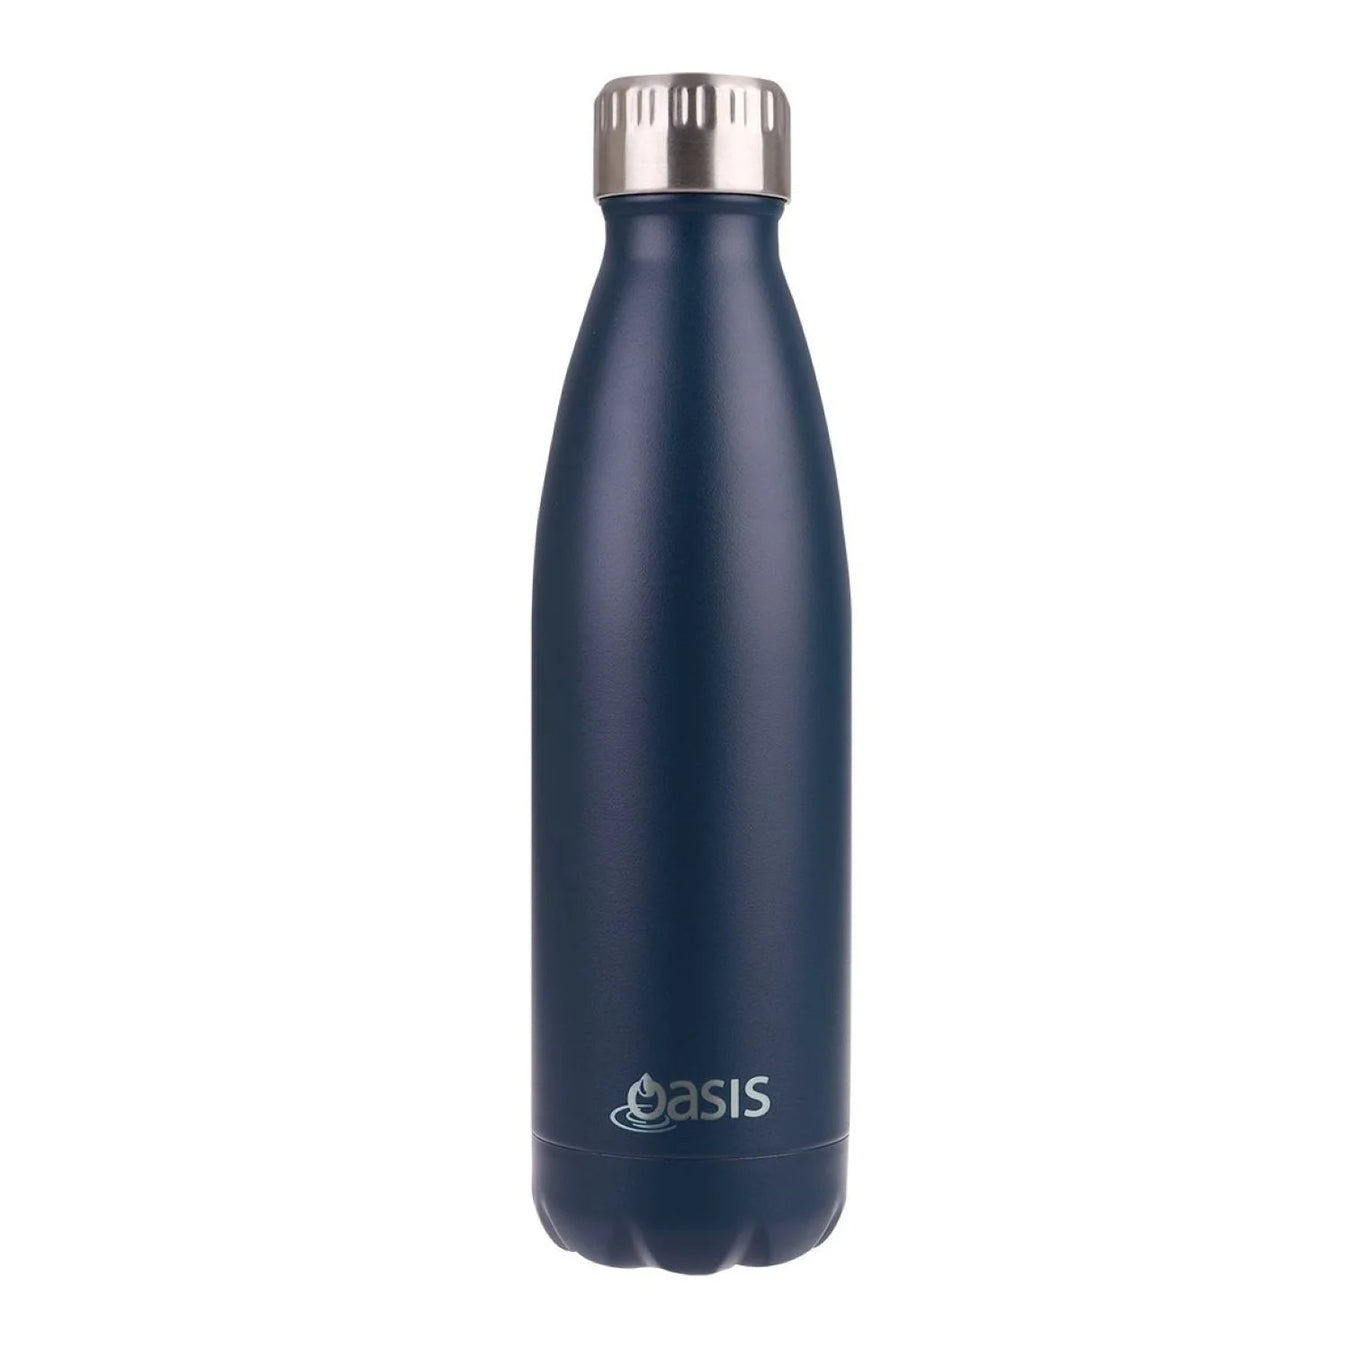 Oasis' Insulated Bottles